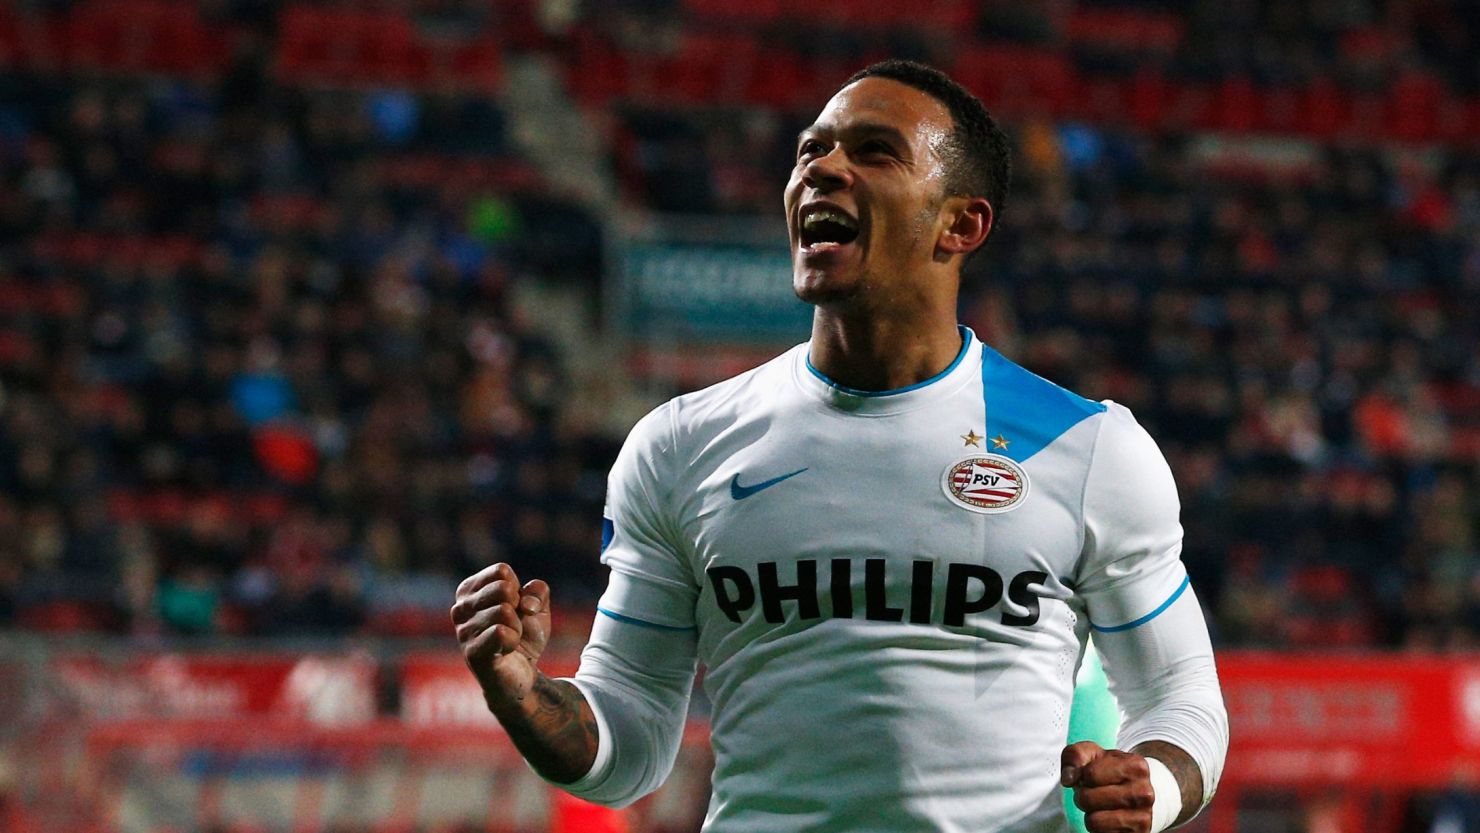 Memphis Depay heads to Manchester United off the back of a prolific, title-winning season with PSV Eindhoven.